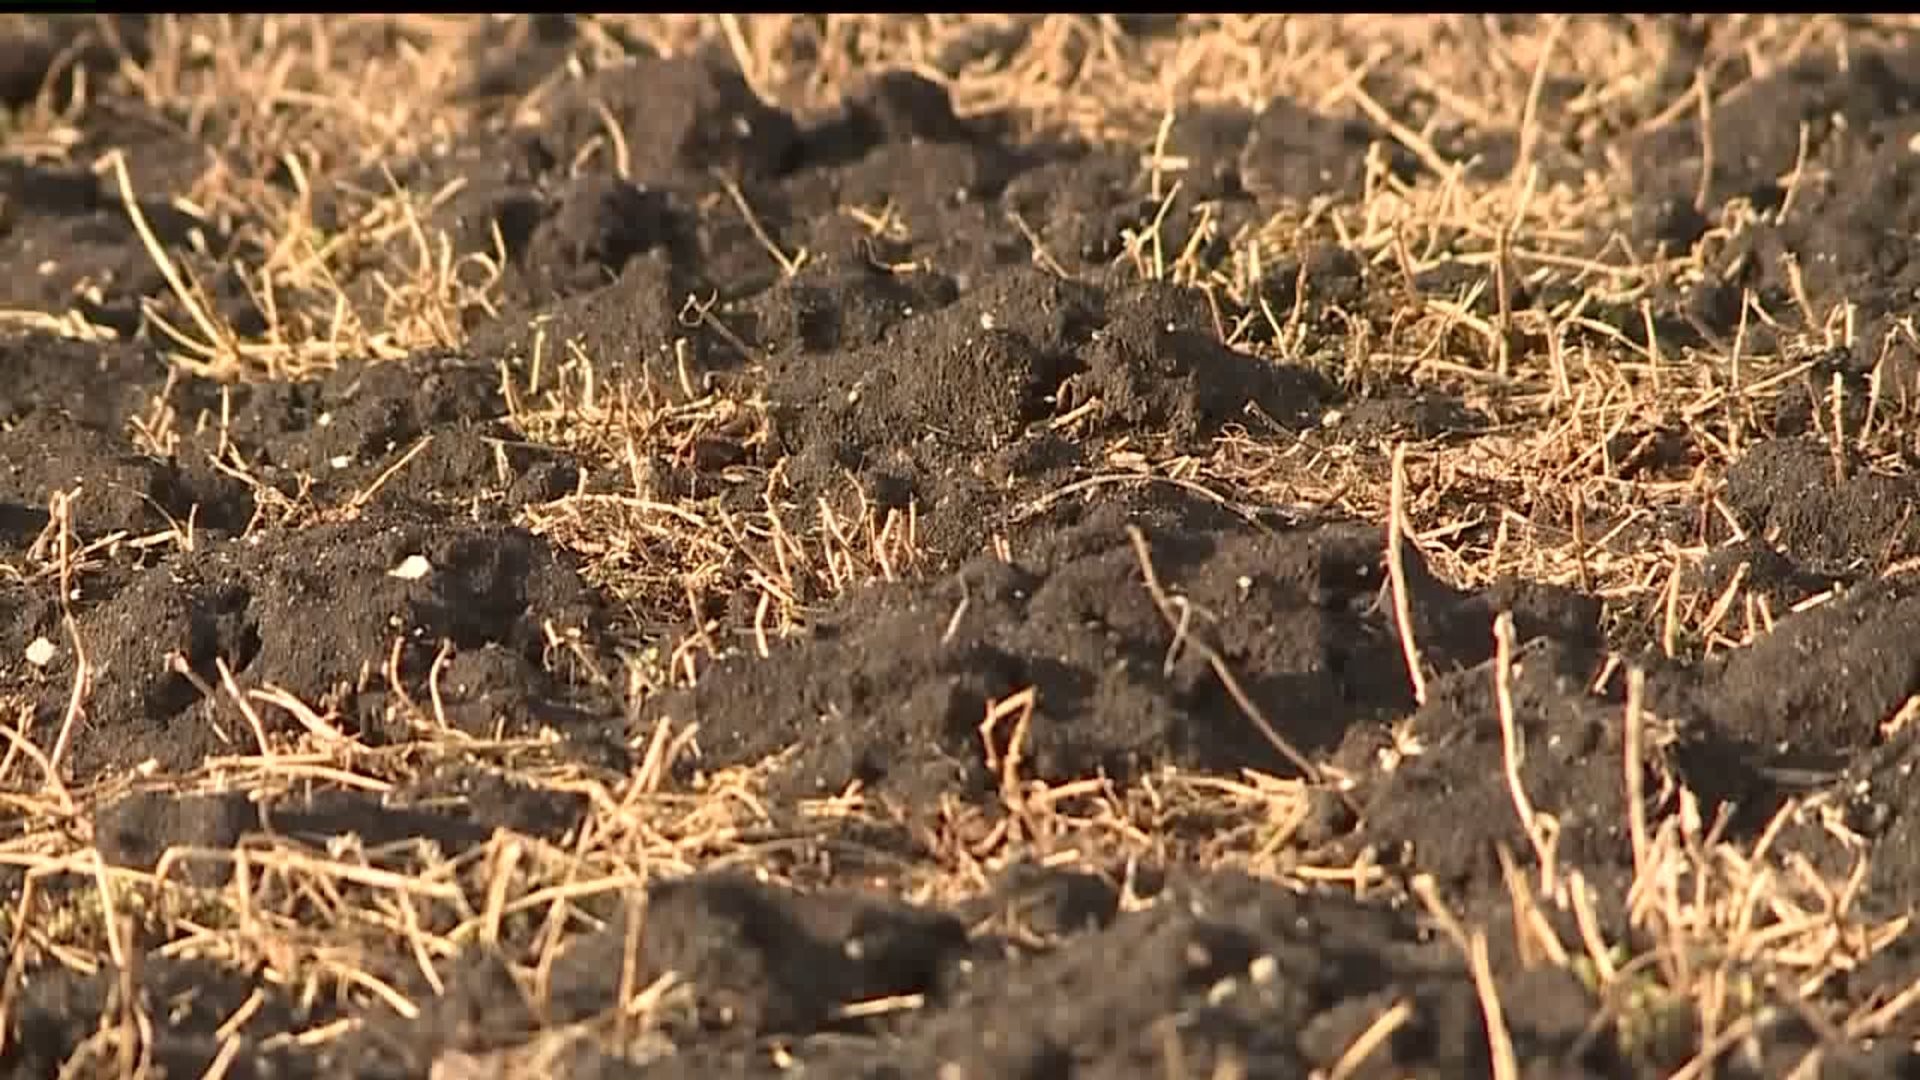 Neighbors blame farm for smelly situation in Dauphin County